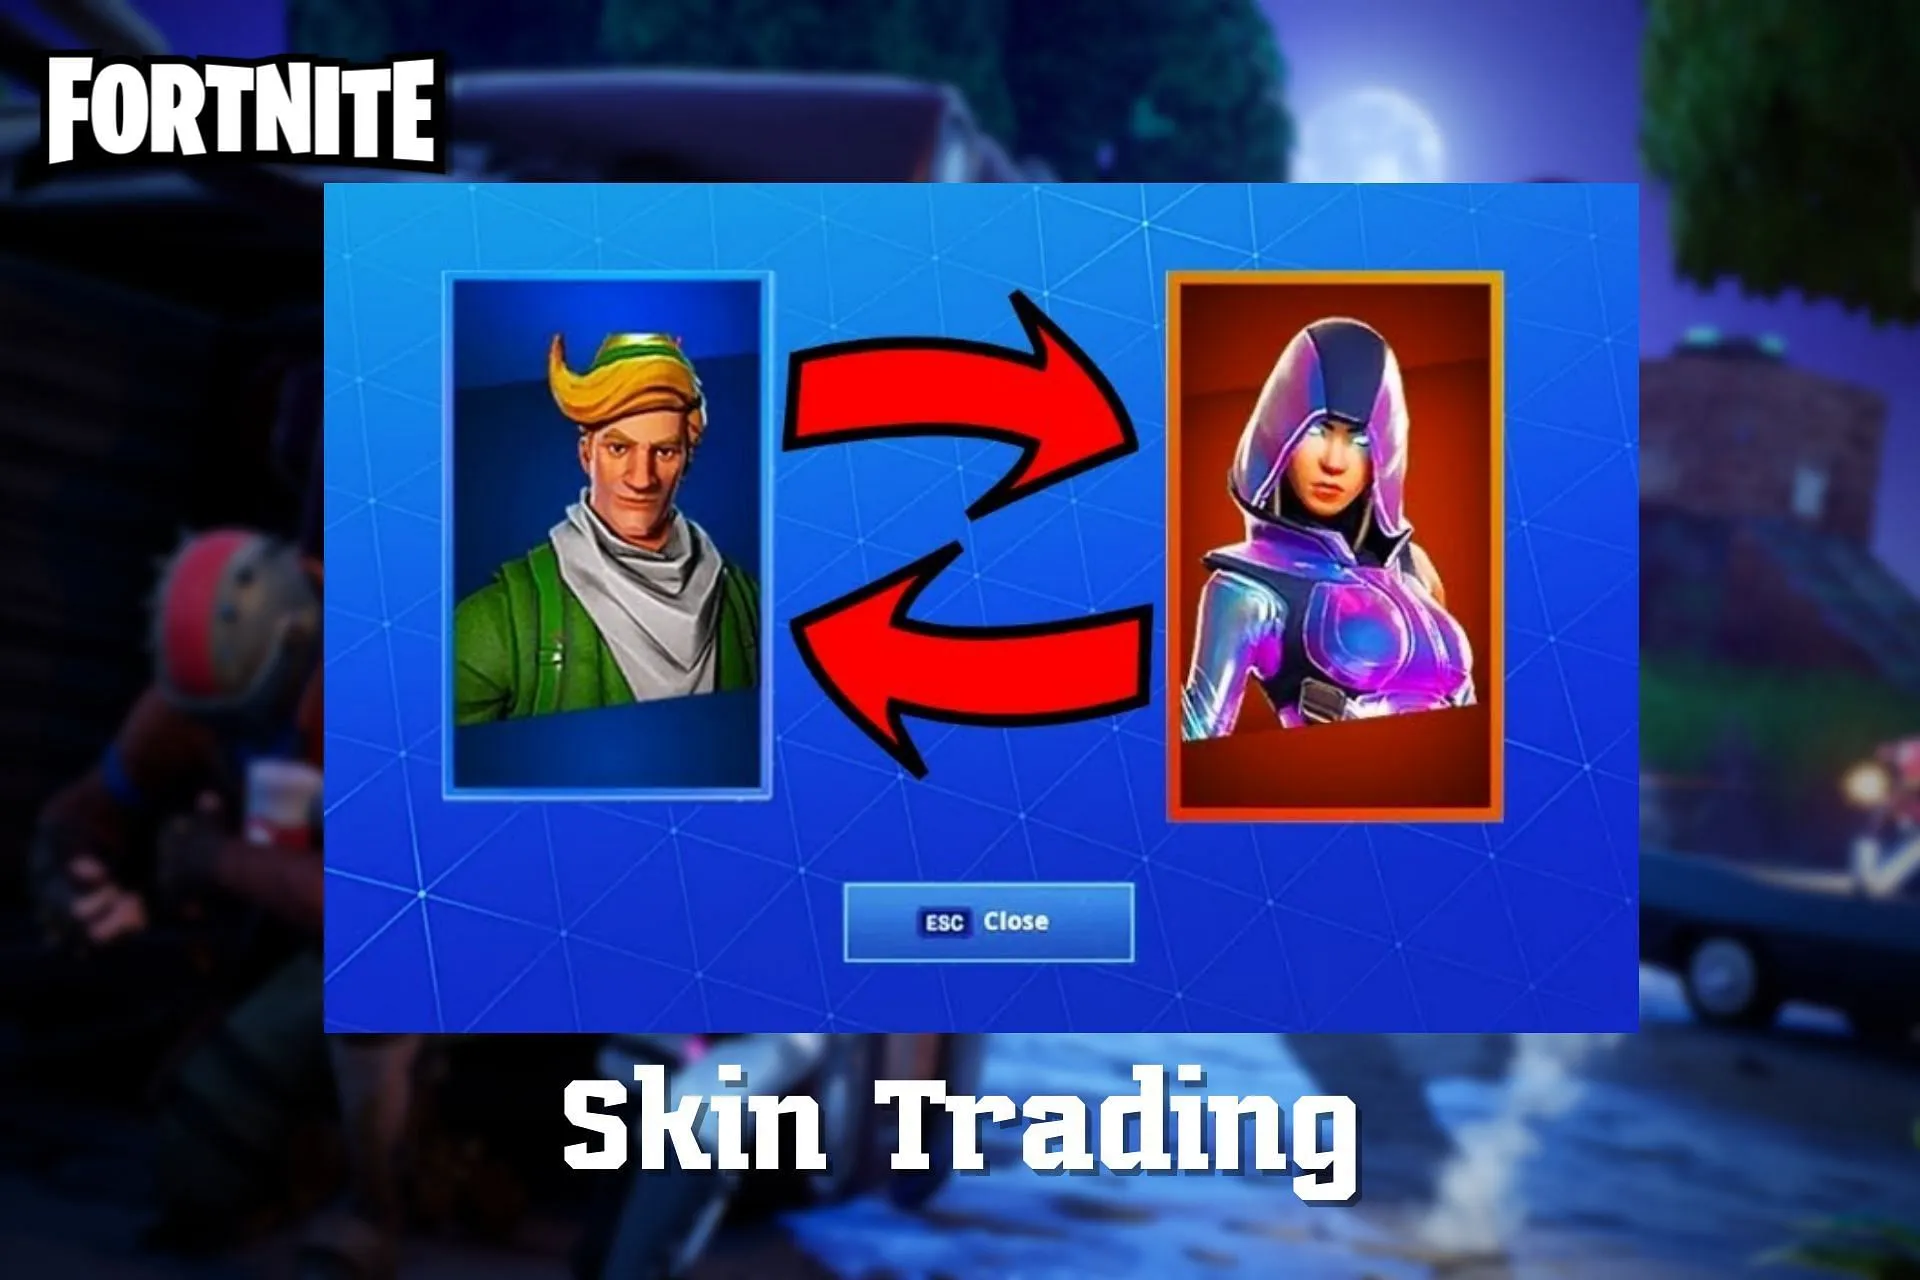 Fortnite Skin Trading: Everything we know so far